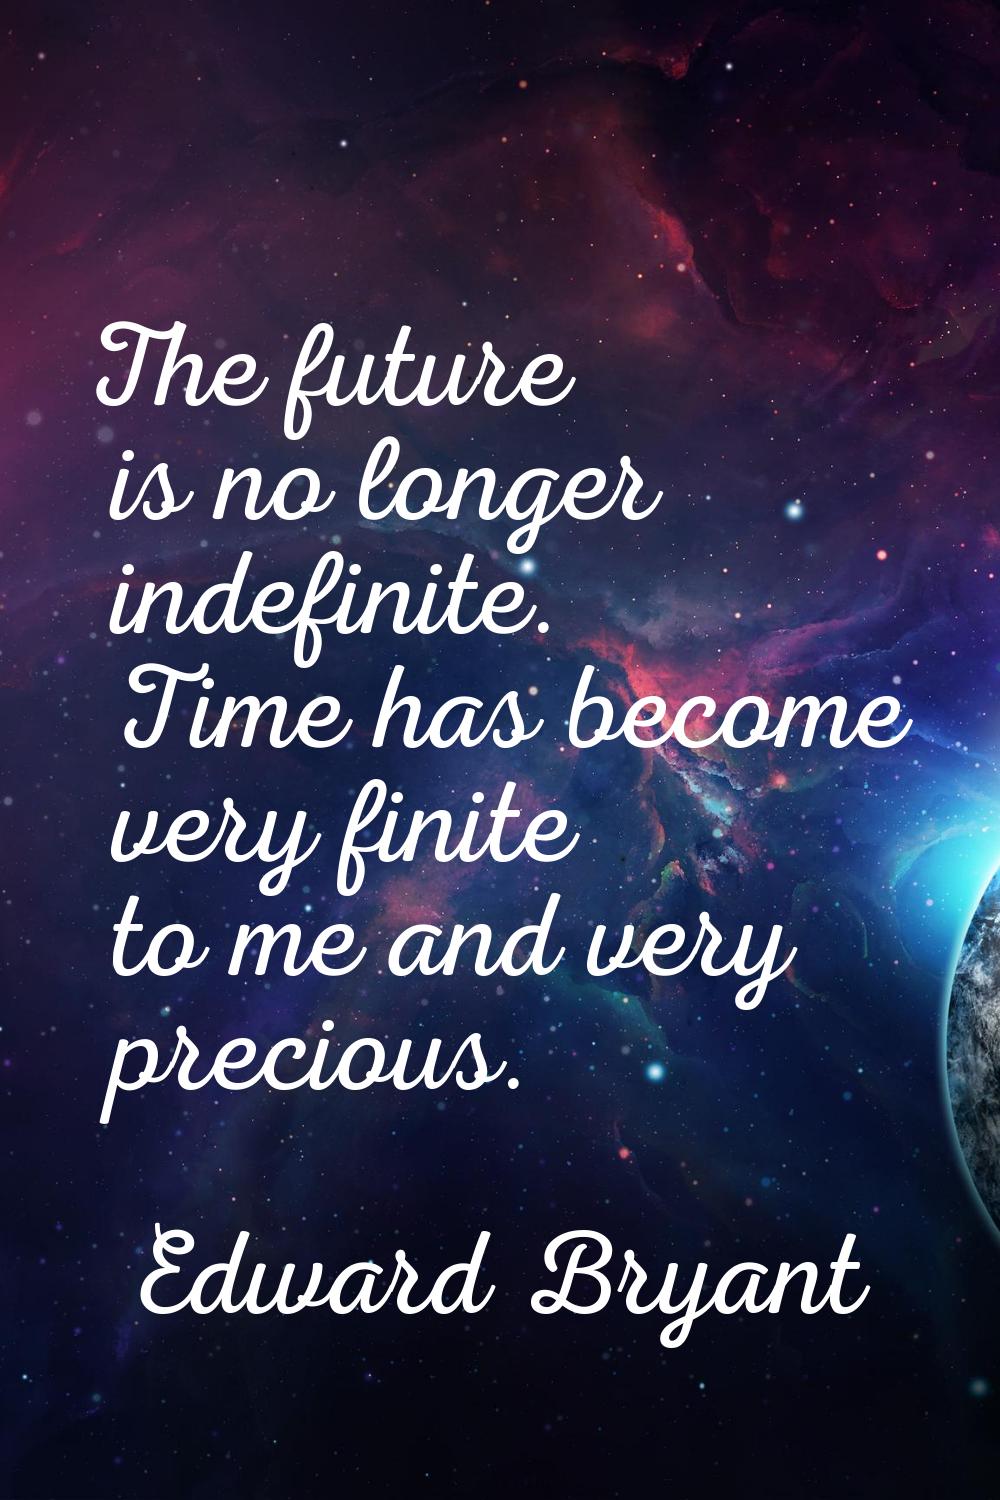 The future is no longer indefinite. Time has become very finite to me and very precious.